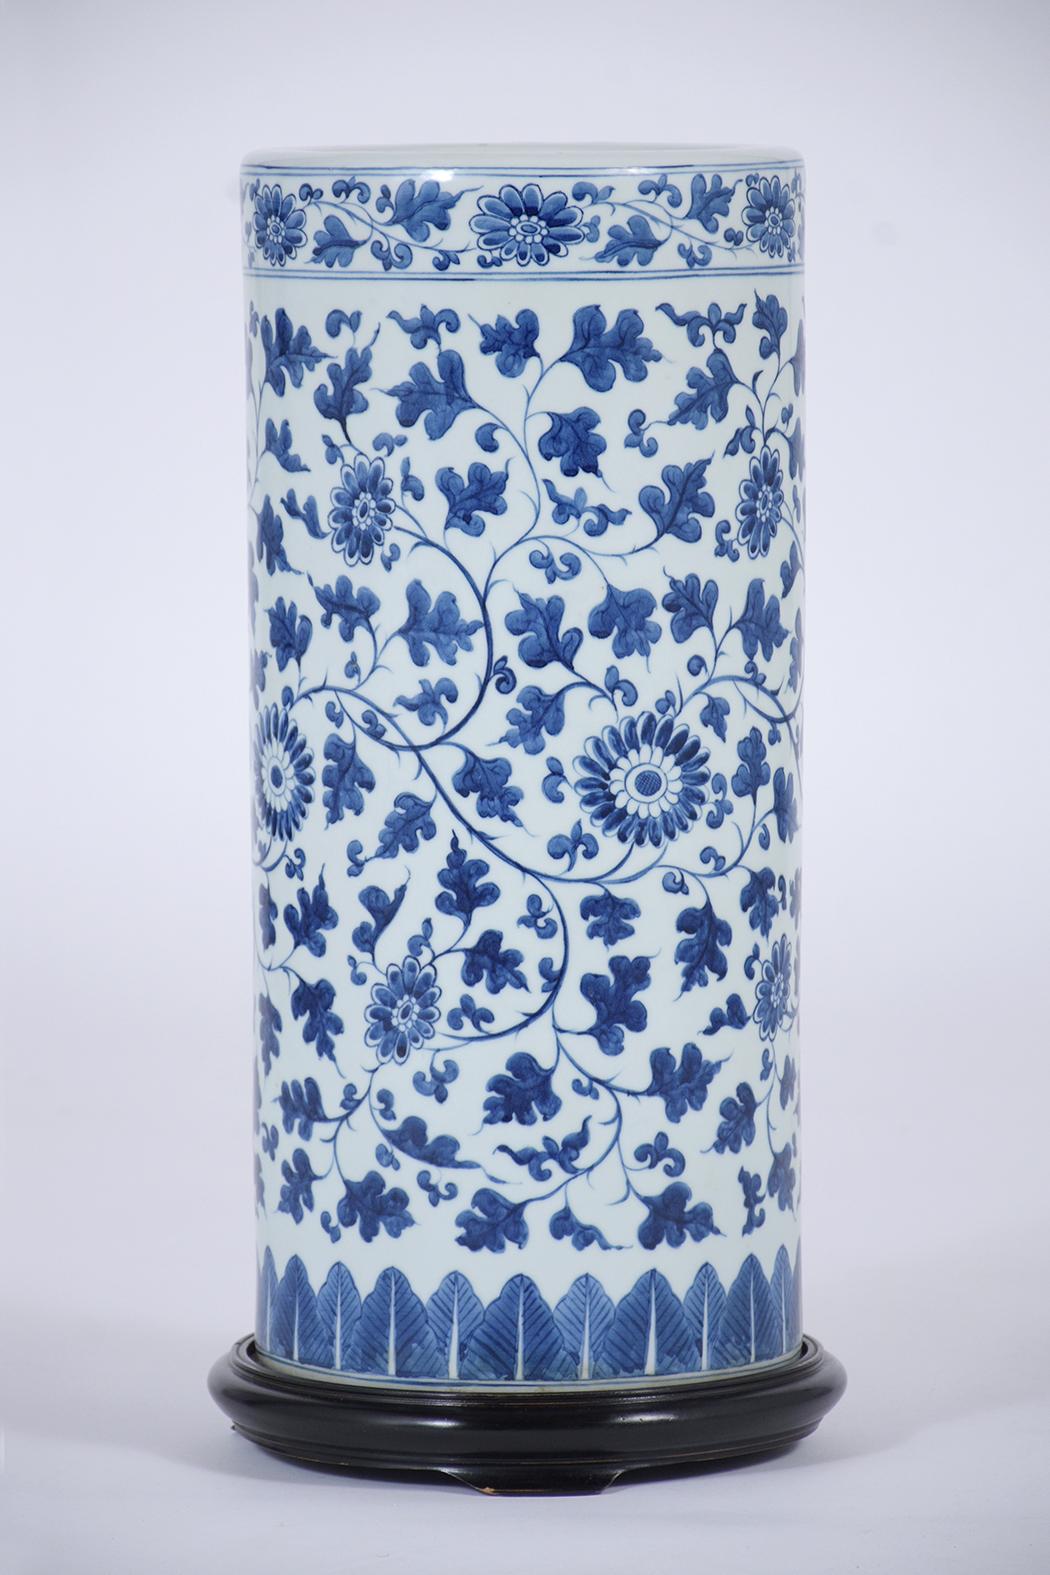 Hand-Painted Chinese Blue Porcelain Umbrella Stand